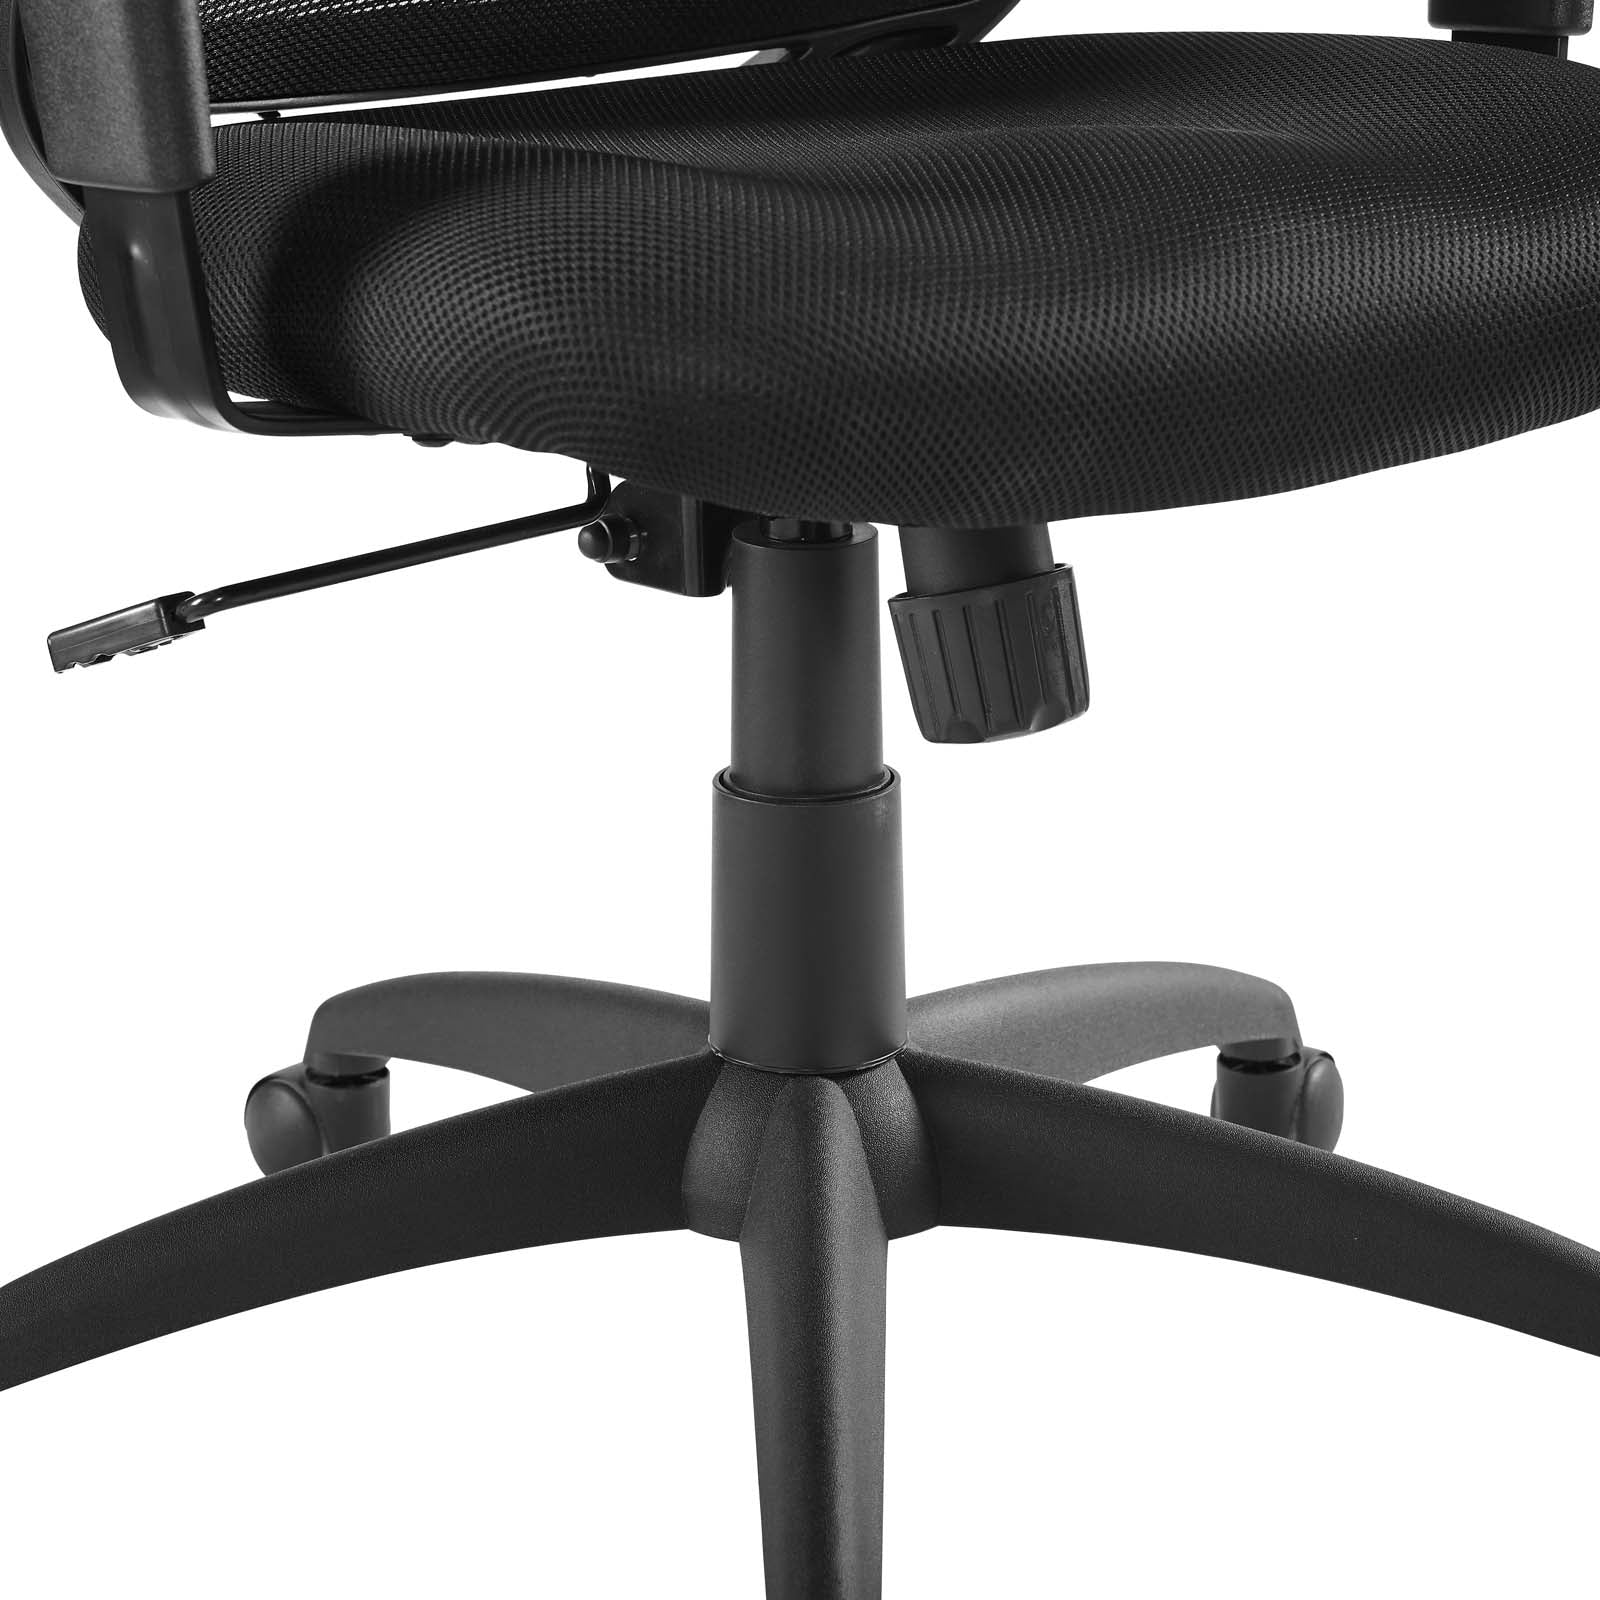 Modway Task Chairs - Forge Office Chair Black